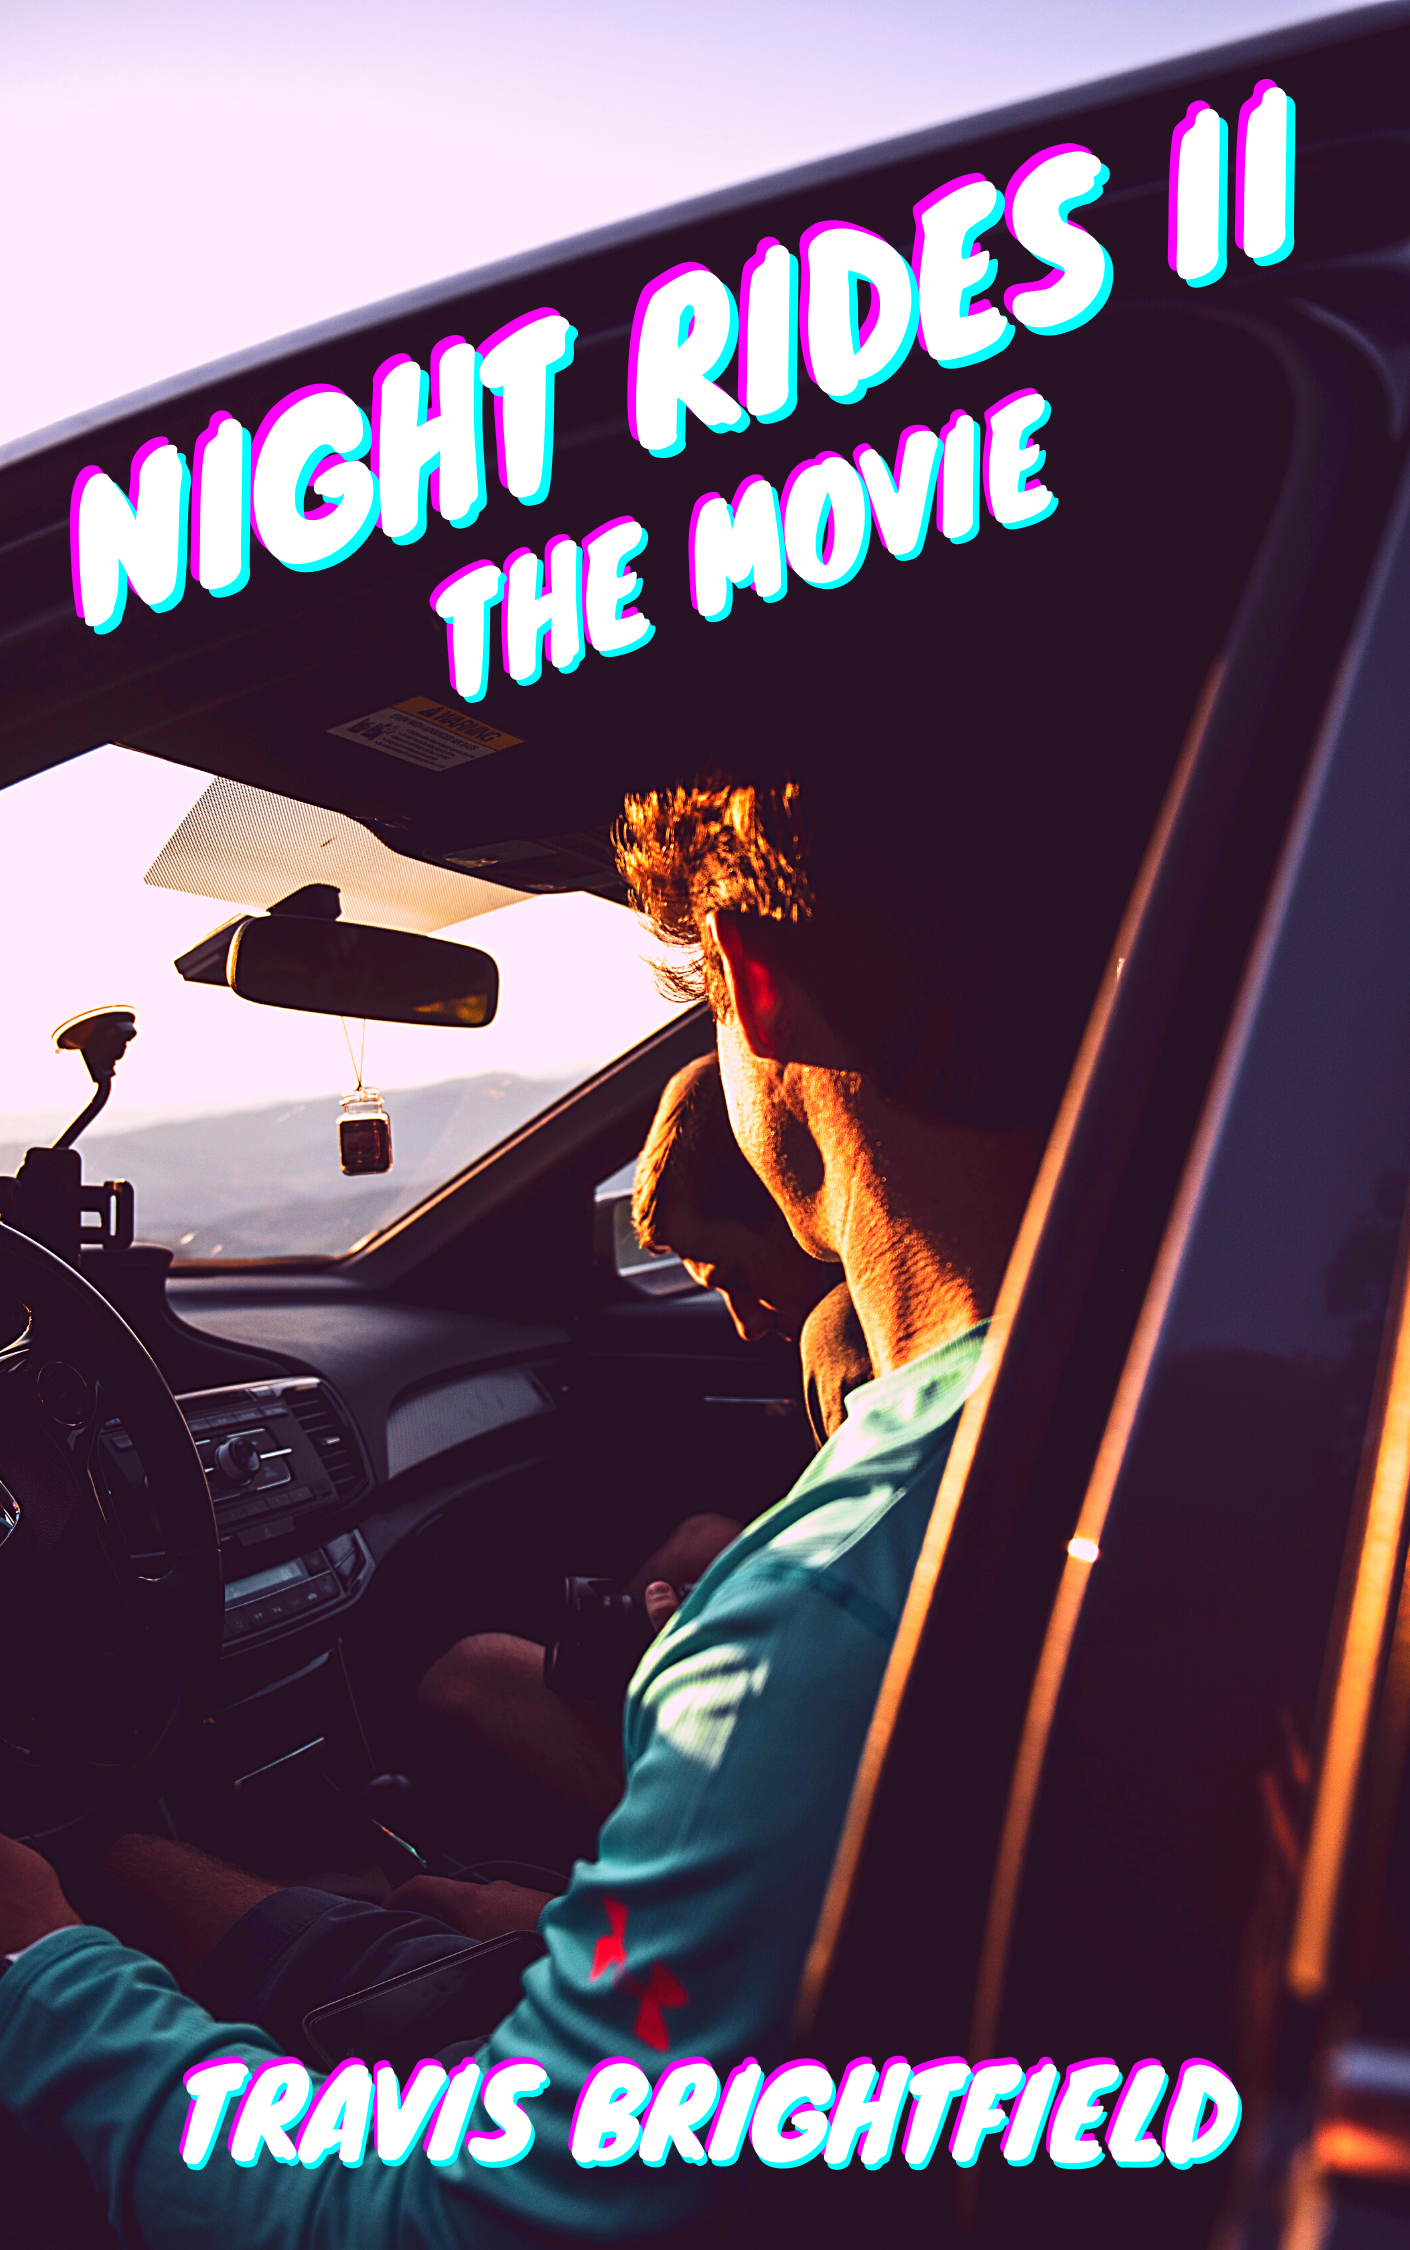 A shot taken from the driver's side of a car. The door is open, showing two late-teen boys in the front again. One of them holds a DSLR camera in their lap. This time the sky is  a hazy purple approaching Dusk. The title reads: Night Rides II: The Movie, in the same neon on font as before. Travis Brightfield is written at the bottom.